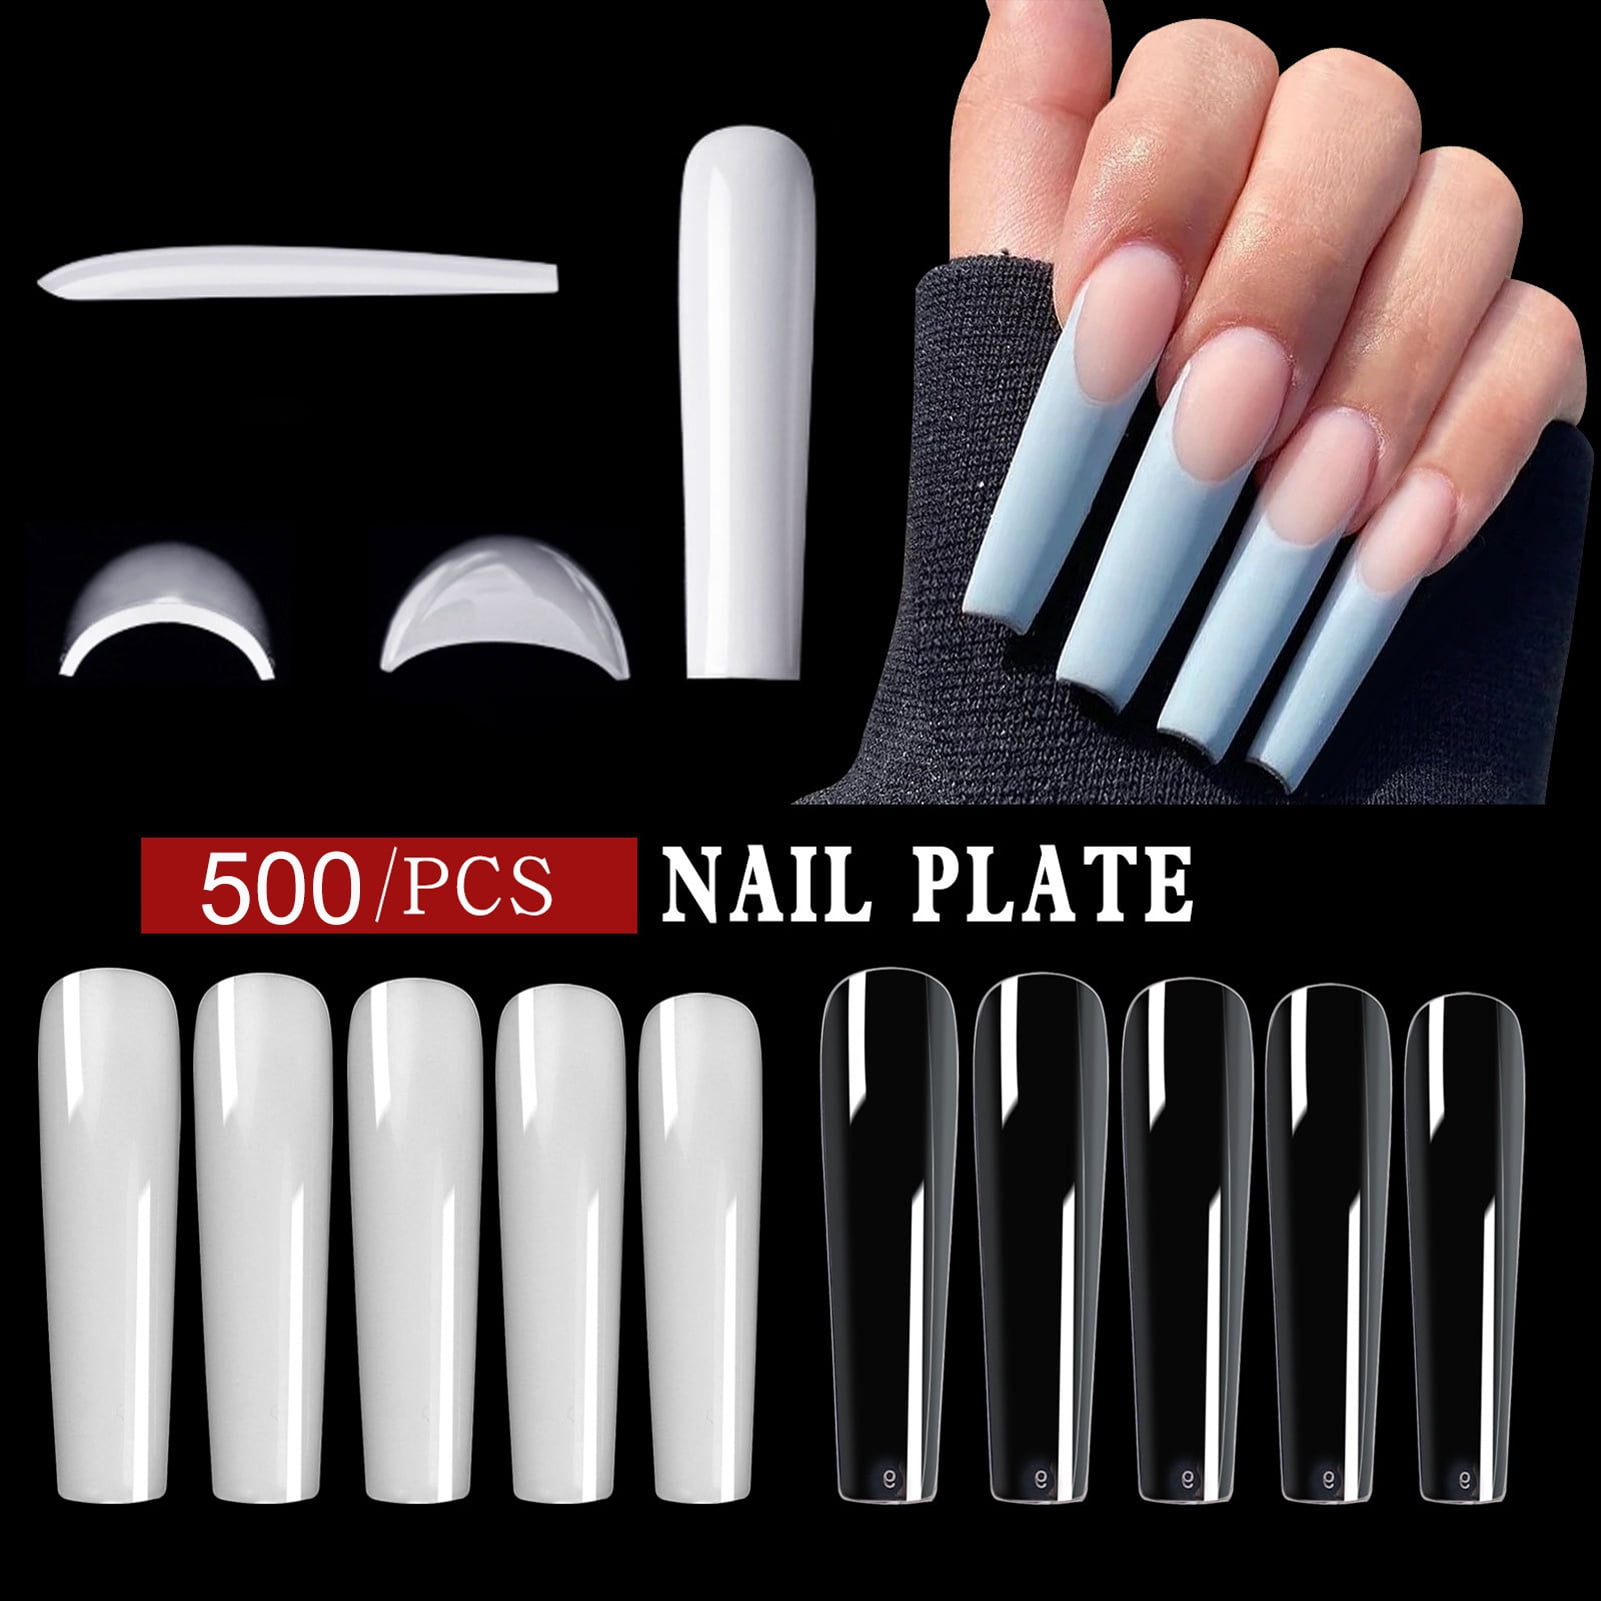 Jiaroswwei 500Pcs Nail Extension Tip Extra Long Fully Cover DIY Square ...